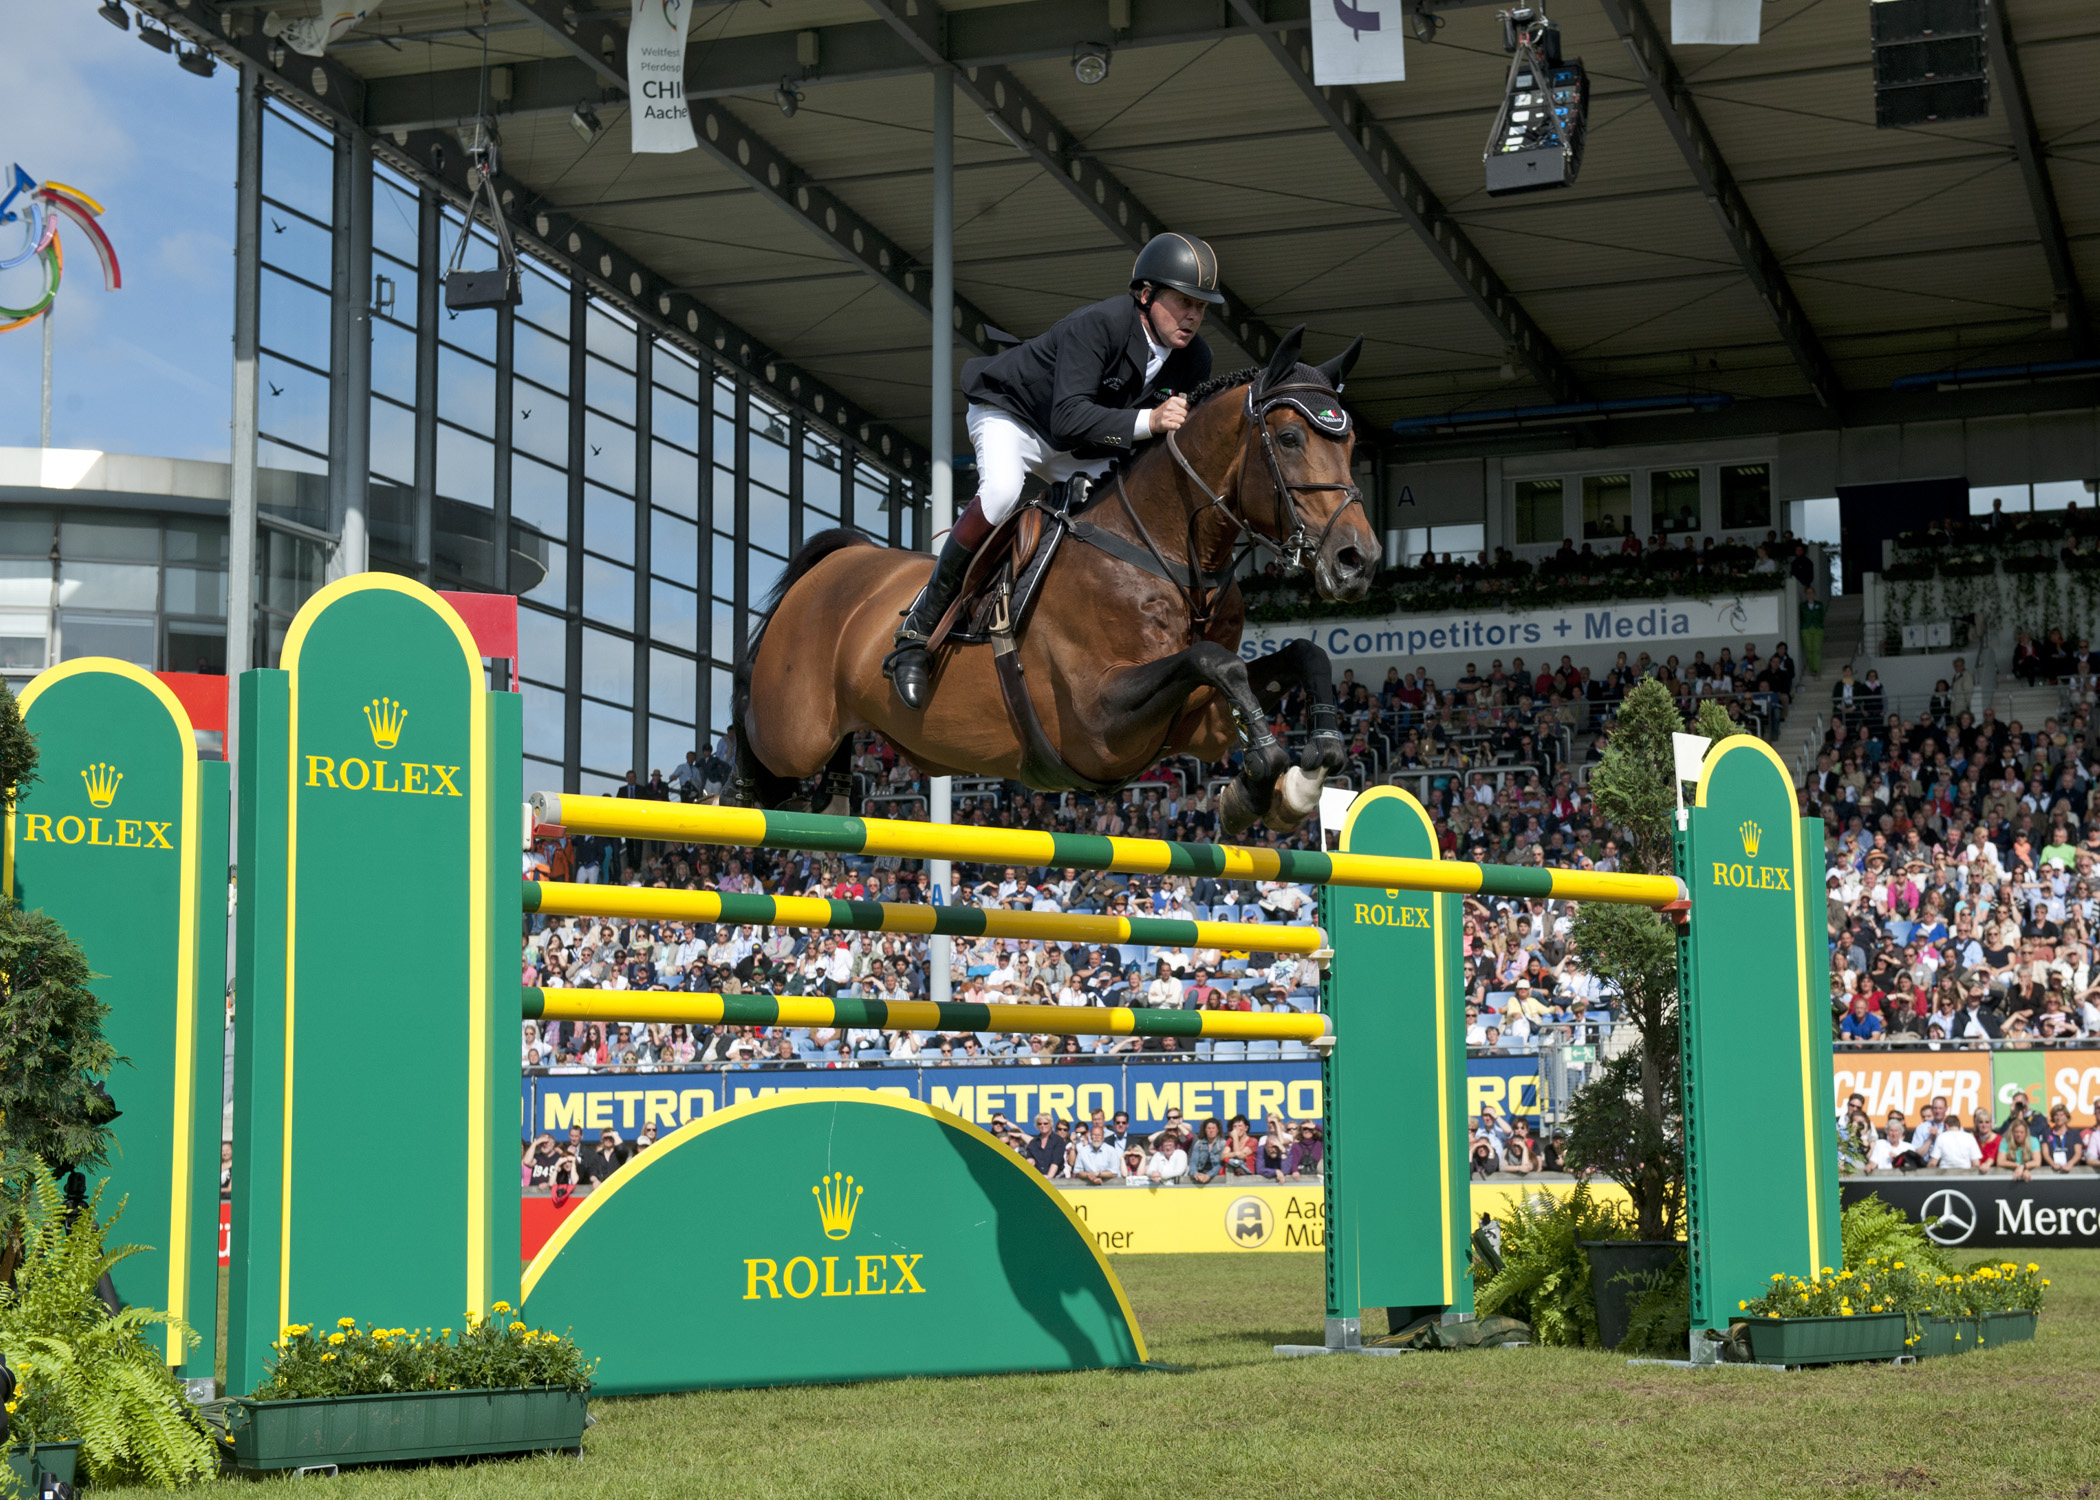 NICK SKELTON WINS THE ROLEX GRAND PRIX AT CHIO AACHEN & FIRST STAGE OF